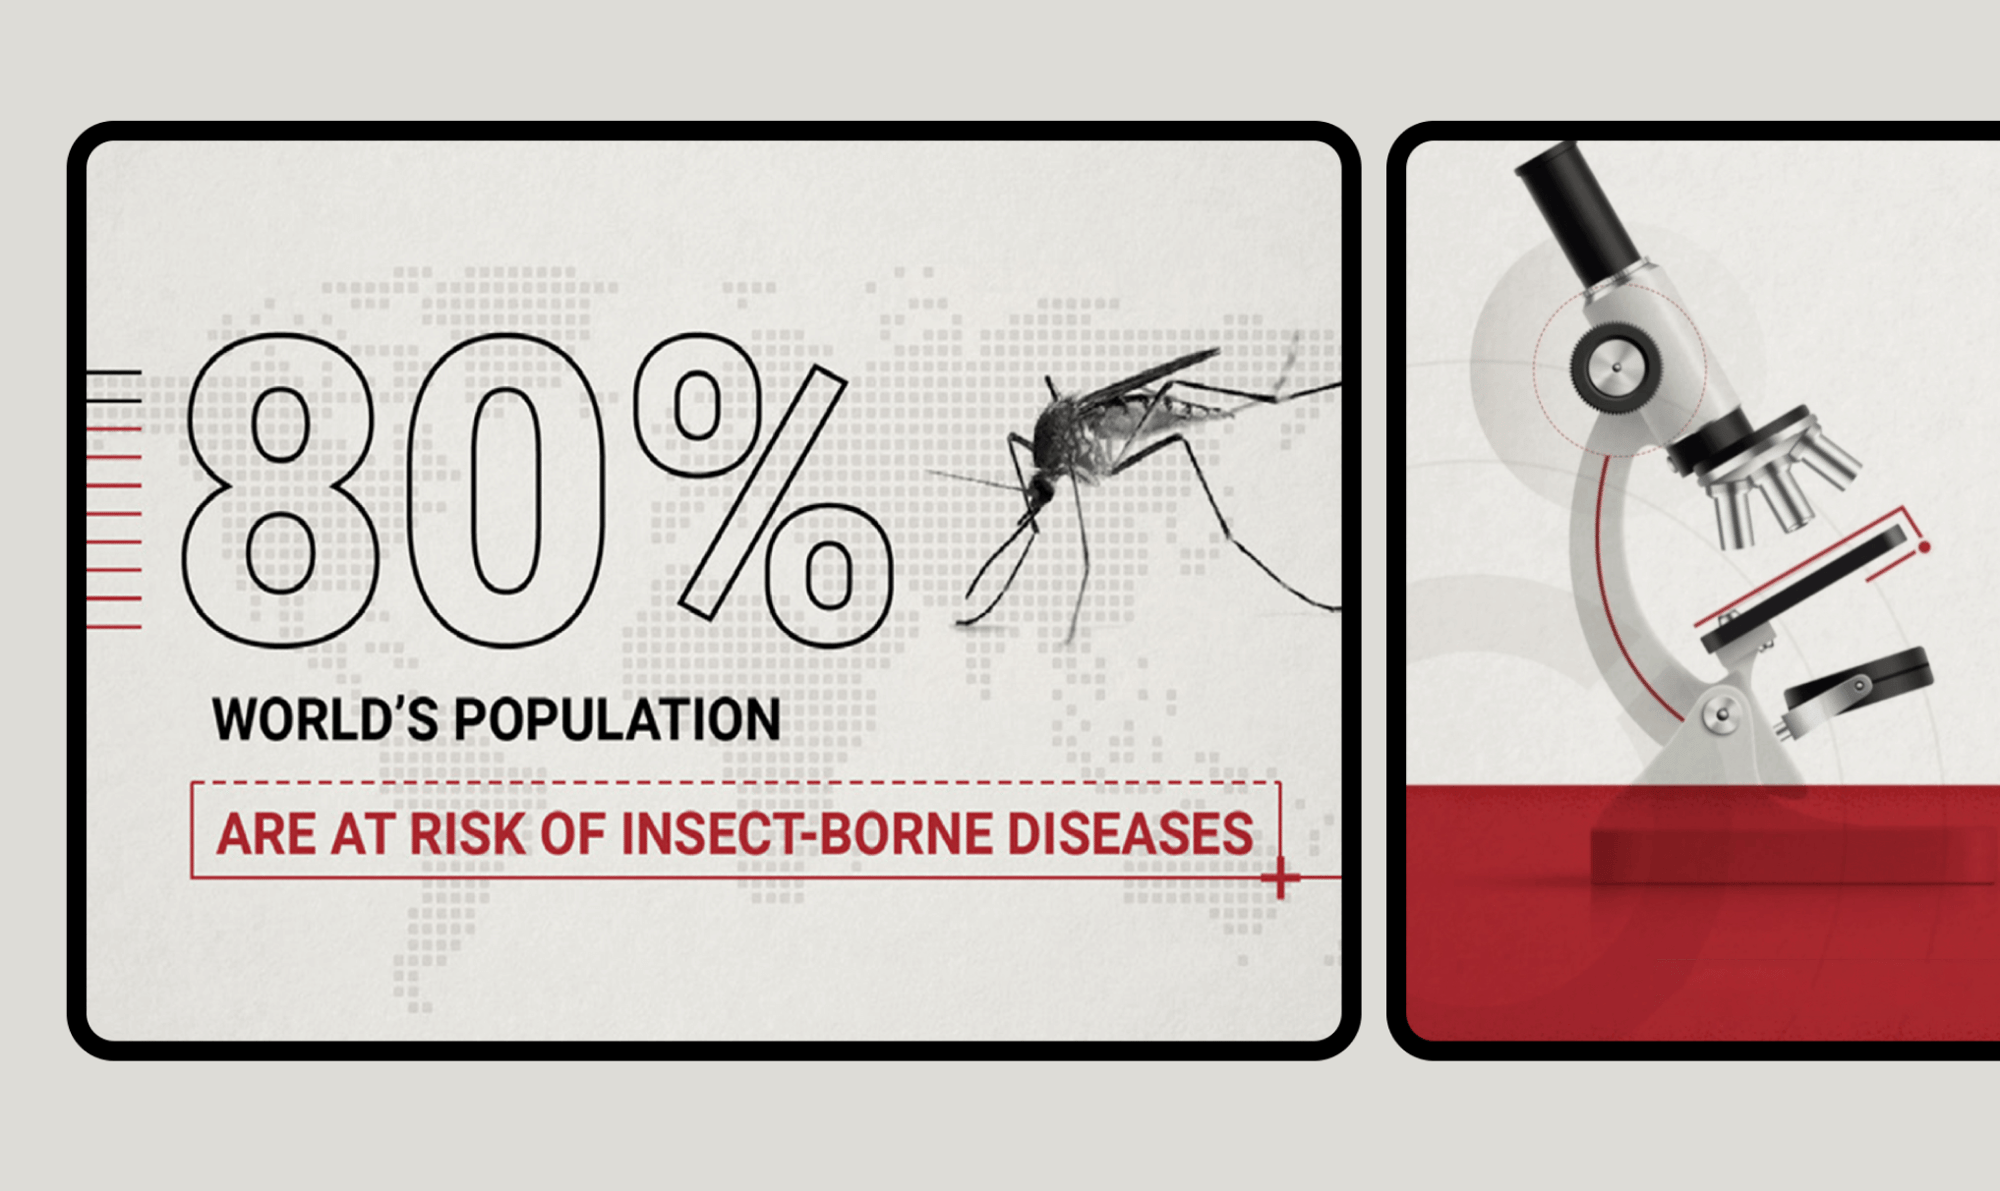 80% of the world's population are at risk of insect borne diseases'